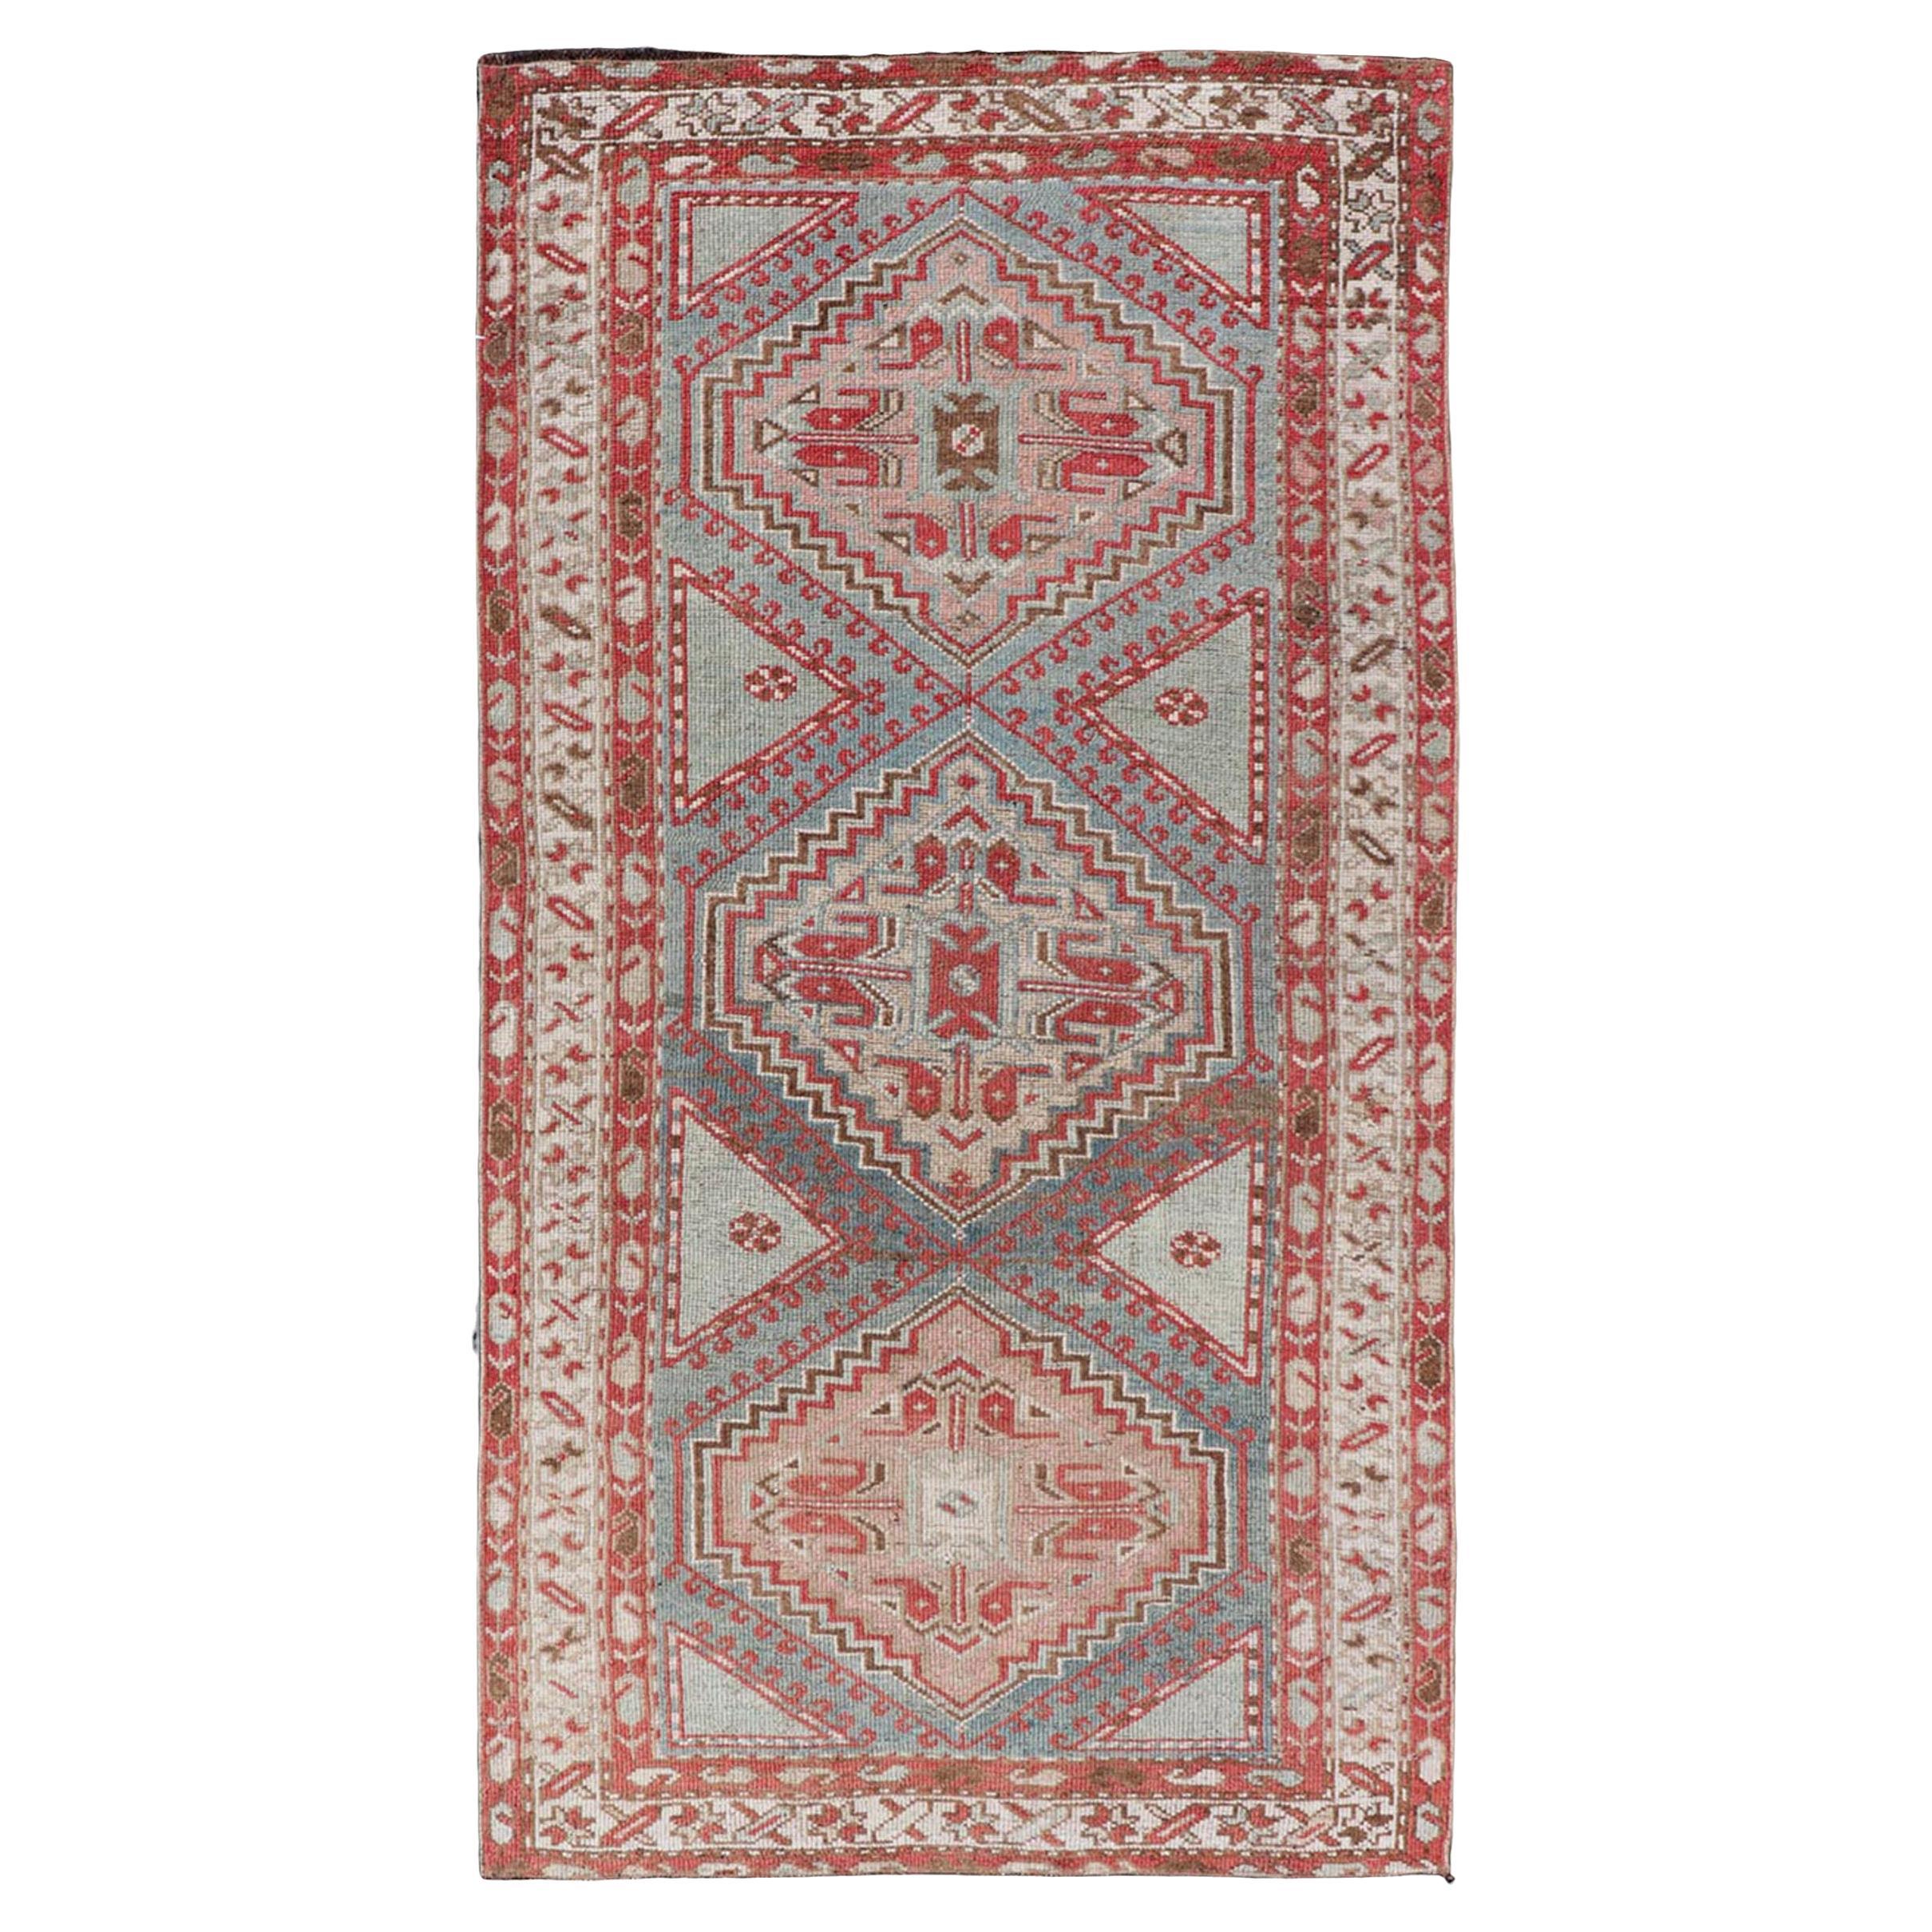 Antique Hand-Knotted Persian Kurdish Rug in Wool with Medallion Design